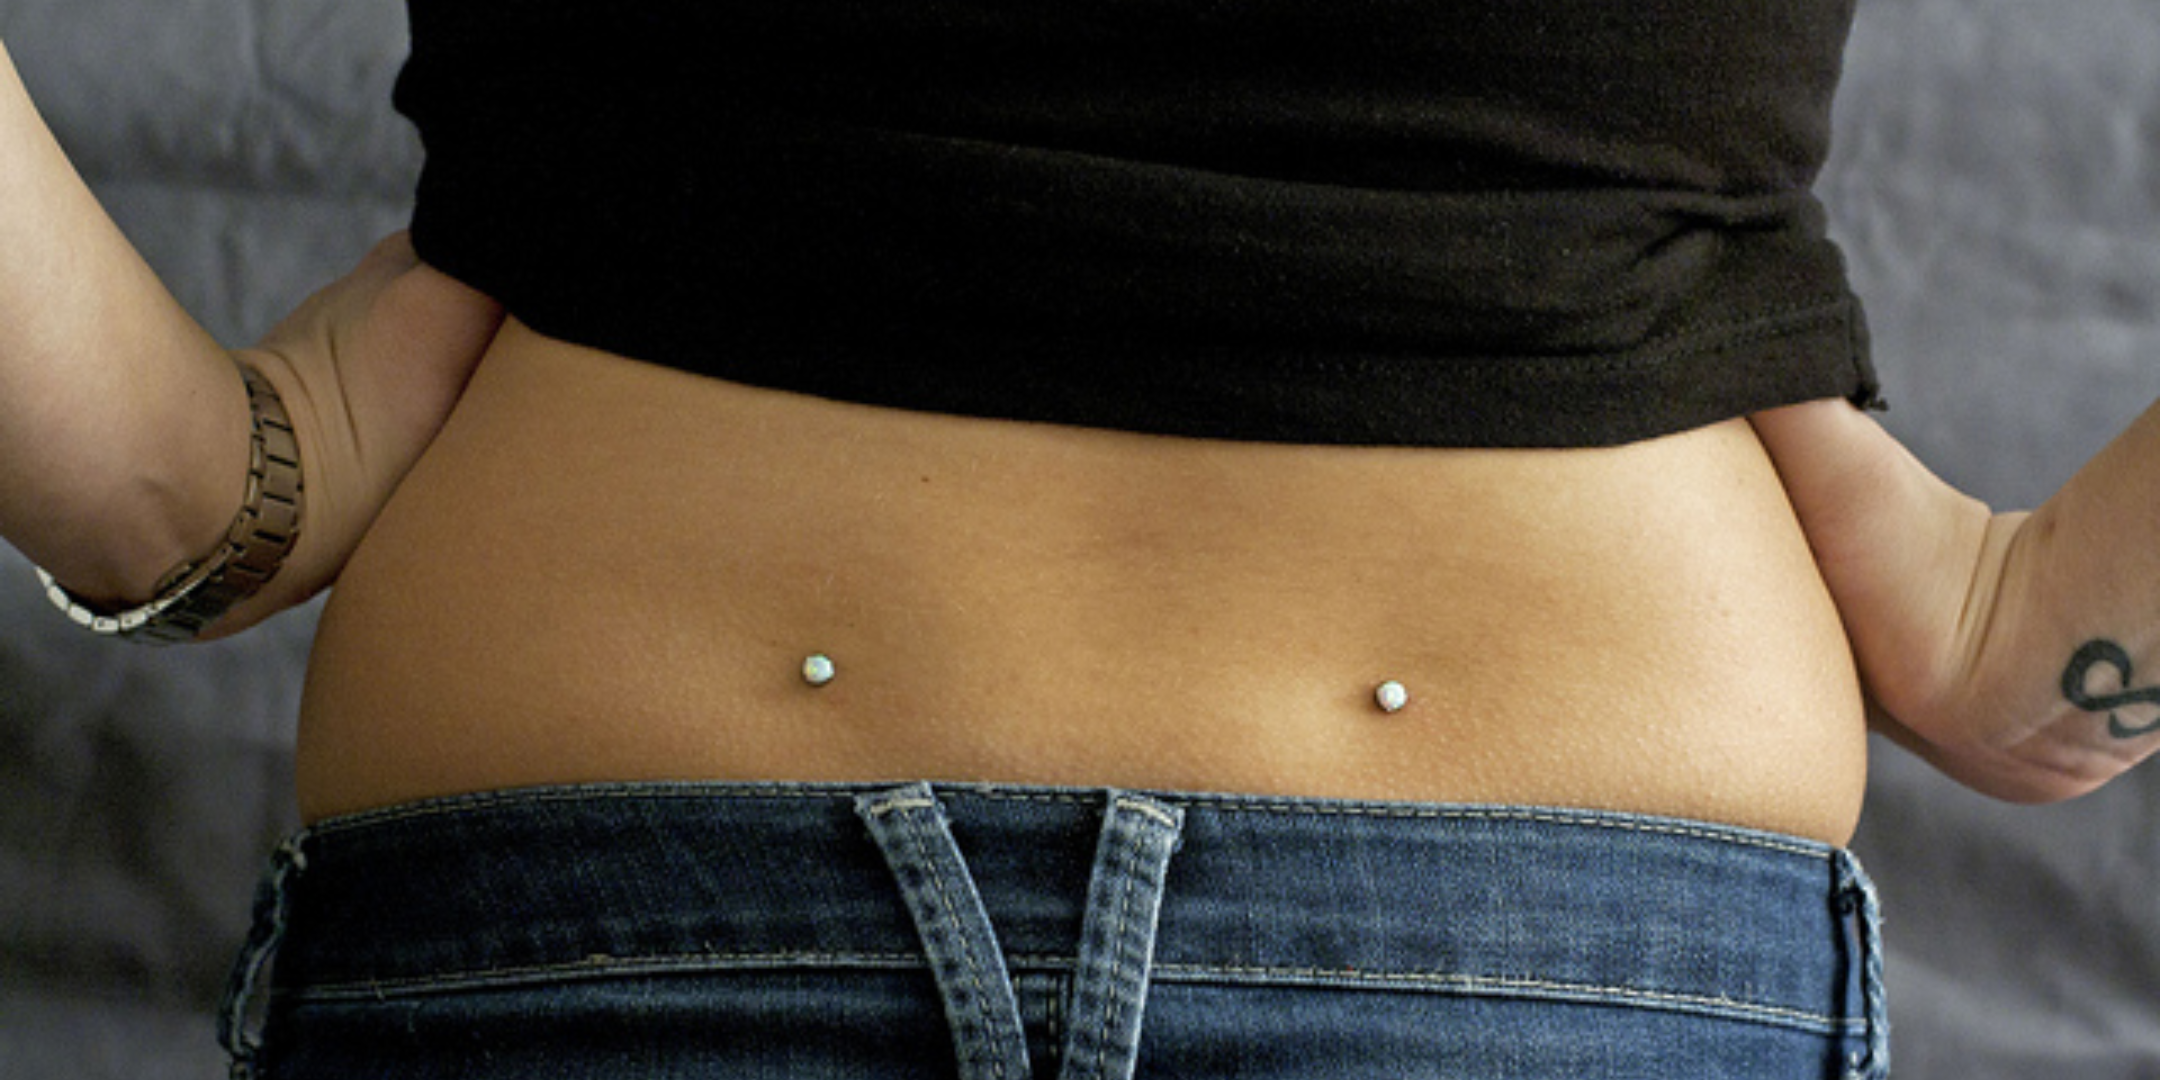 Piercing The Unusual: All About Back Dimple Piercings